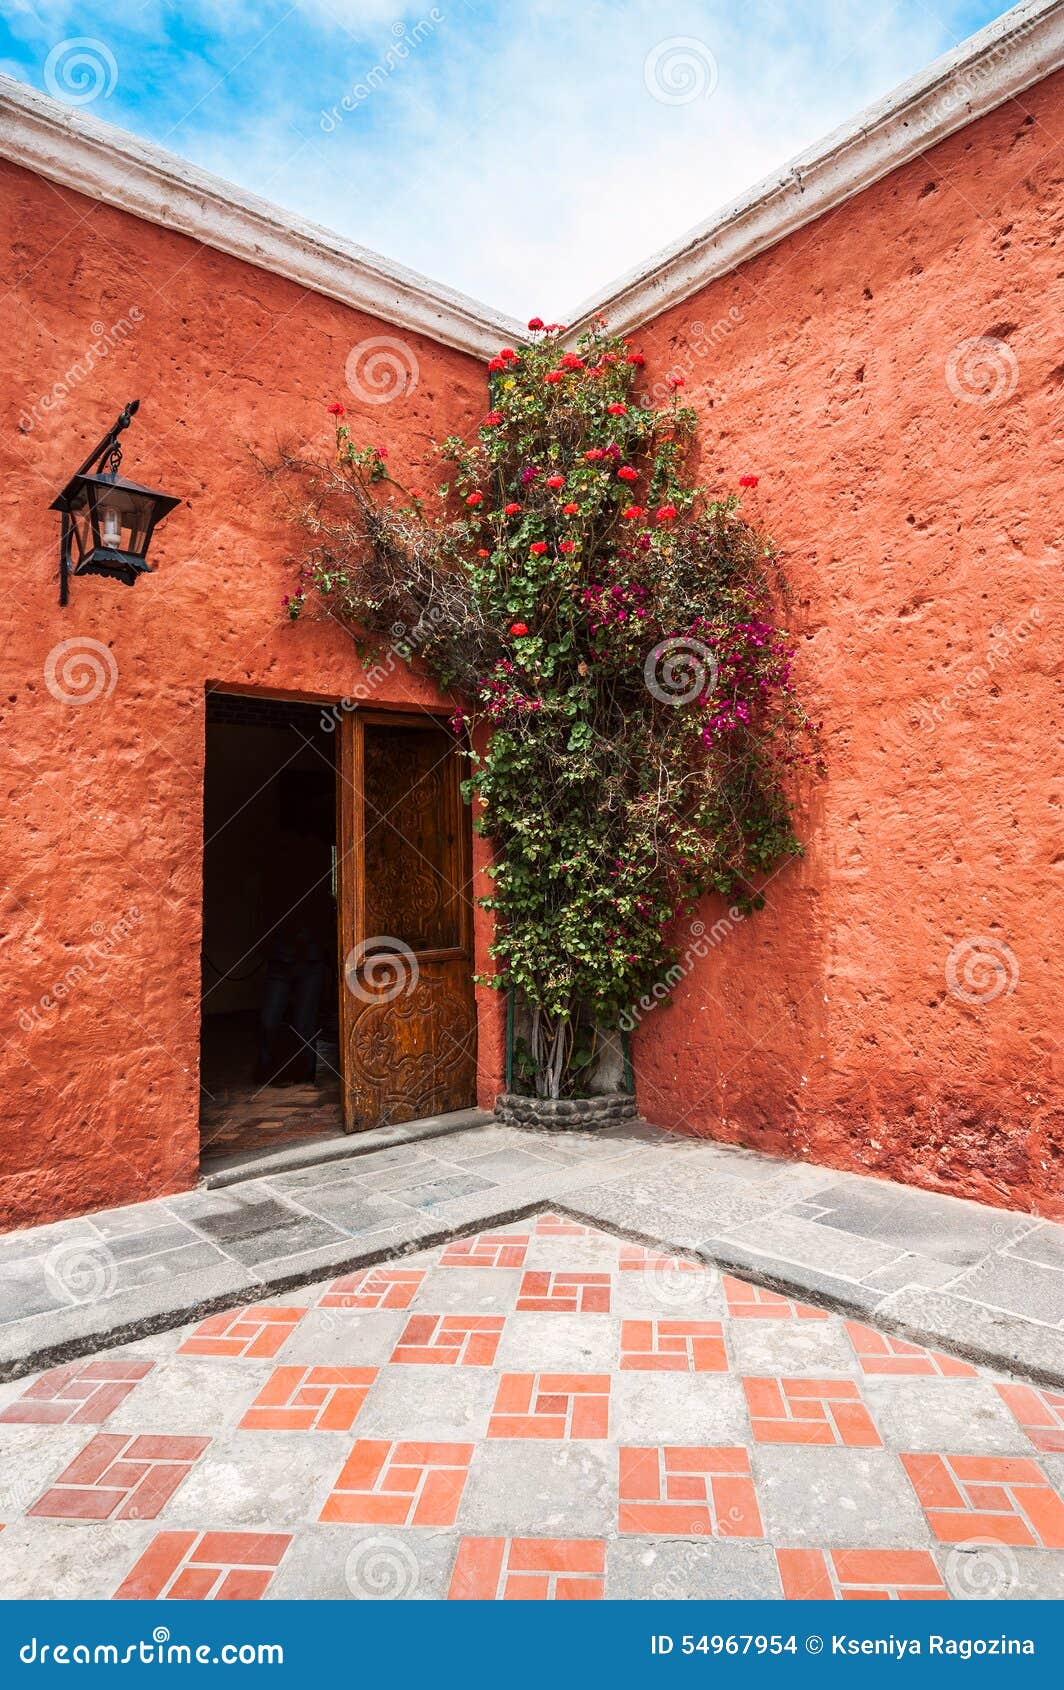 old spanish colonial mansion, arequipa, peru